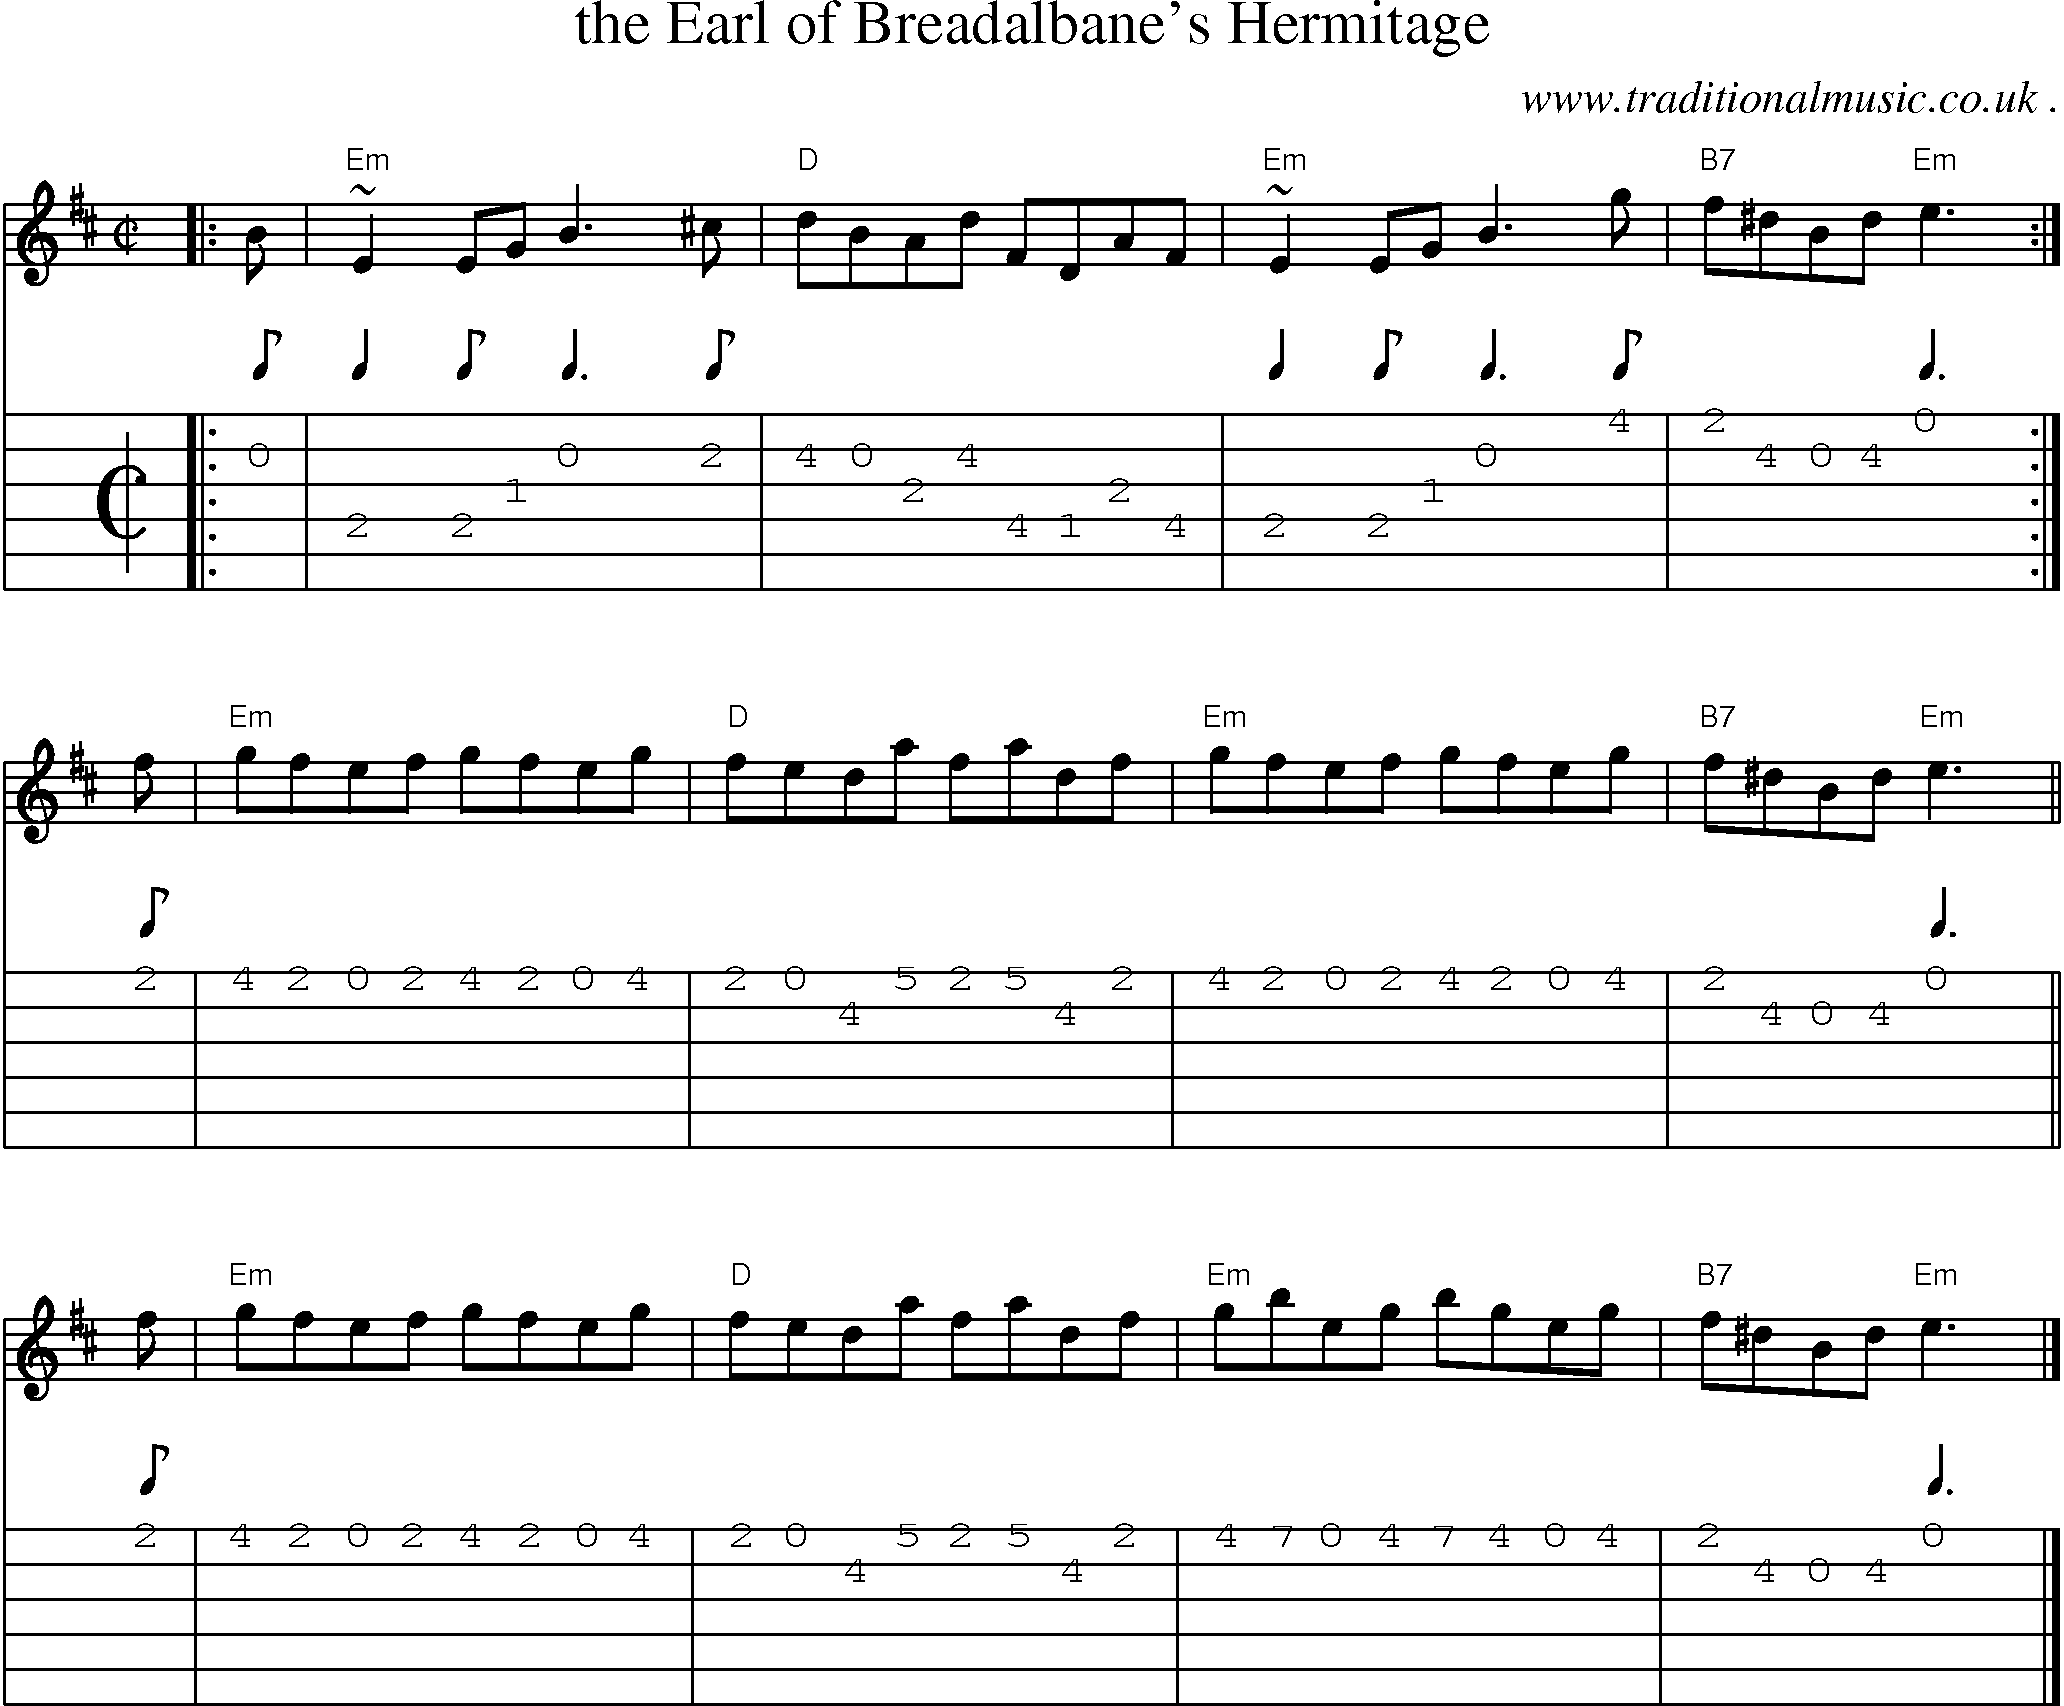 Sheet-music  score, Chords and Guitar Tabs for The Earl Of Breadalbanes Hermitage